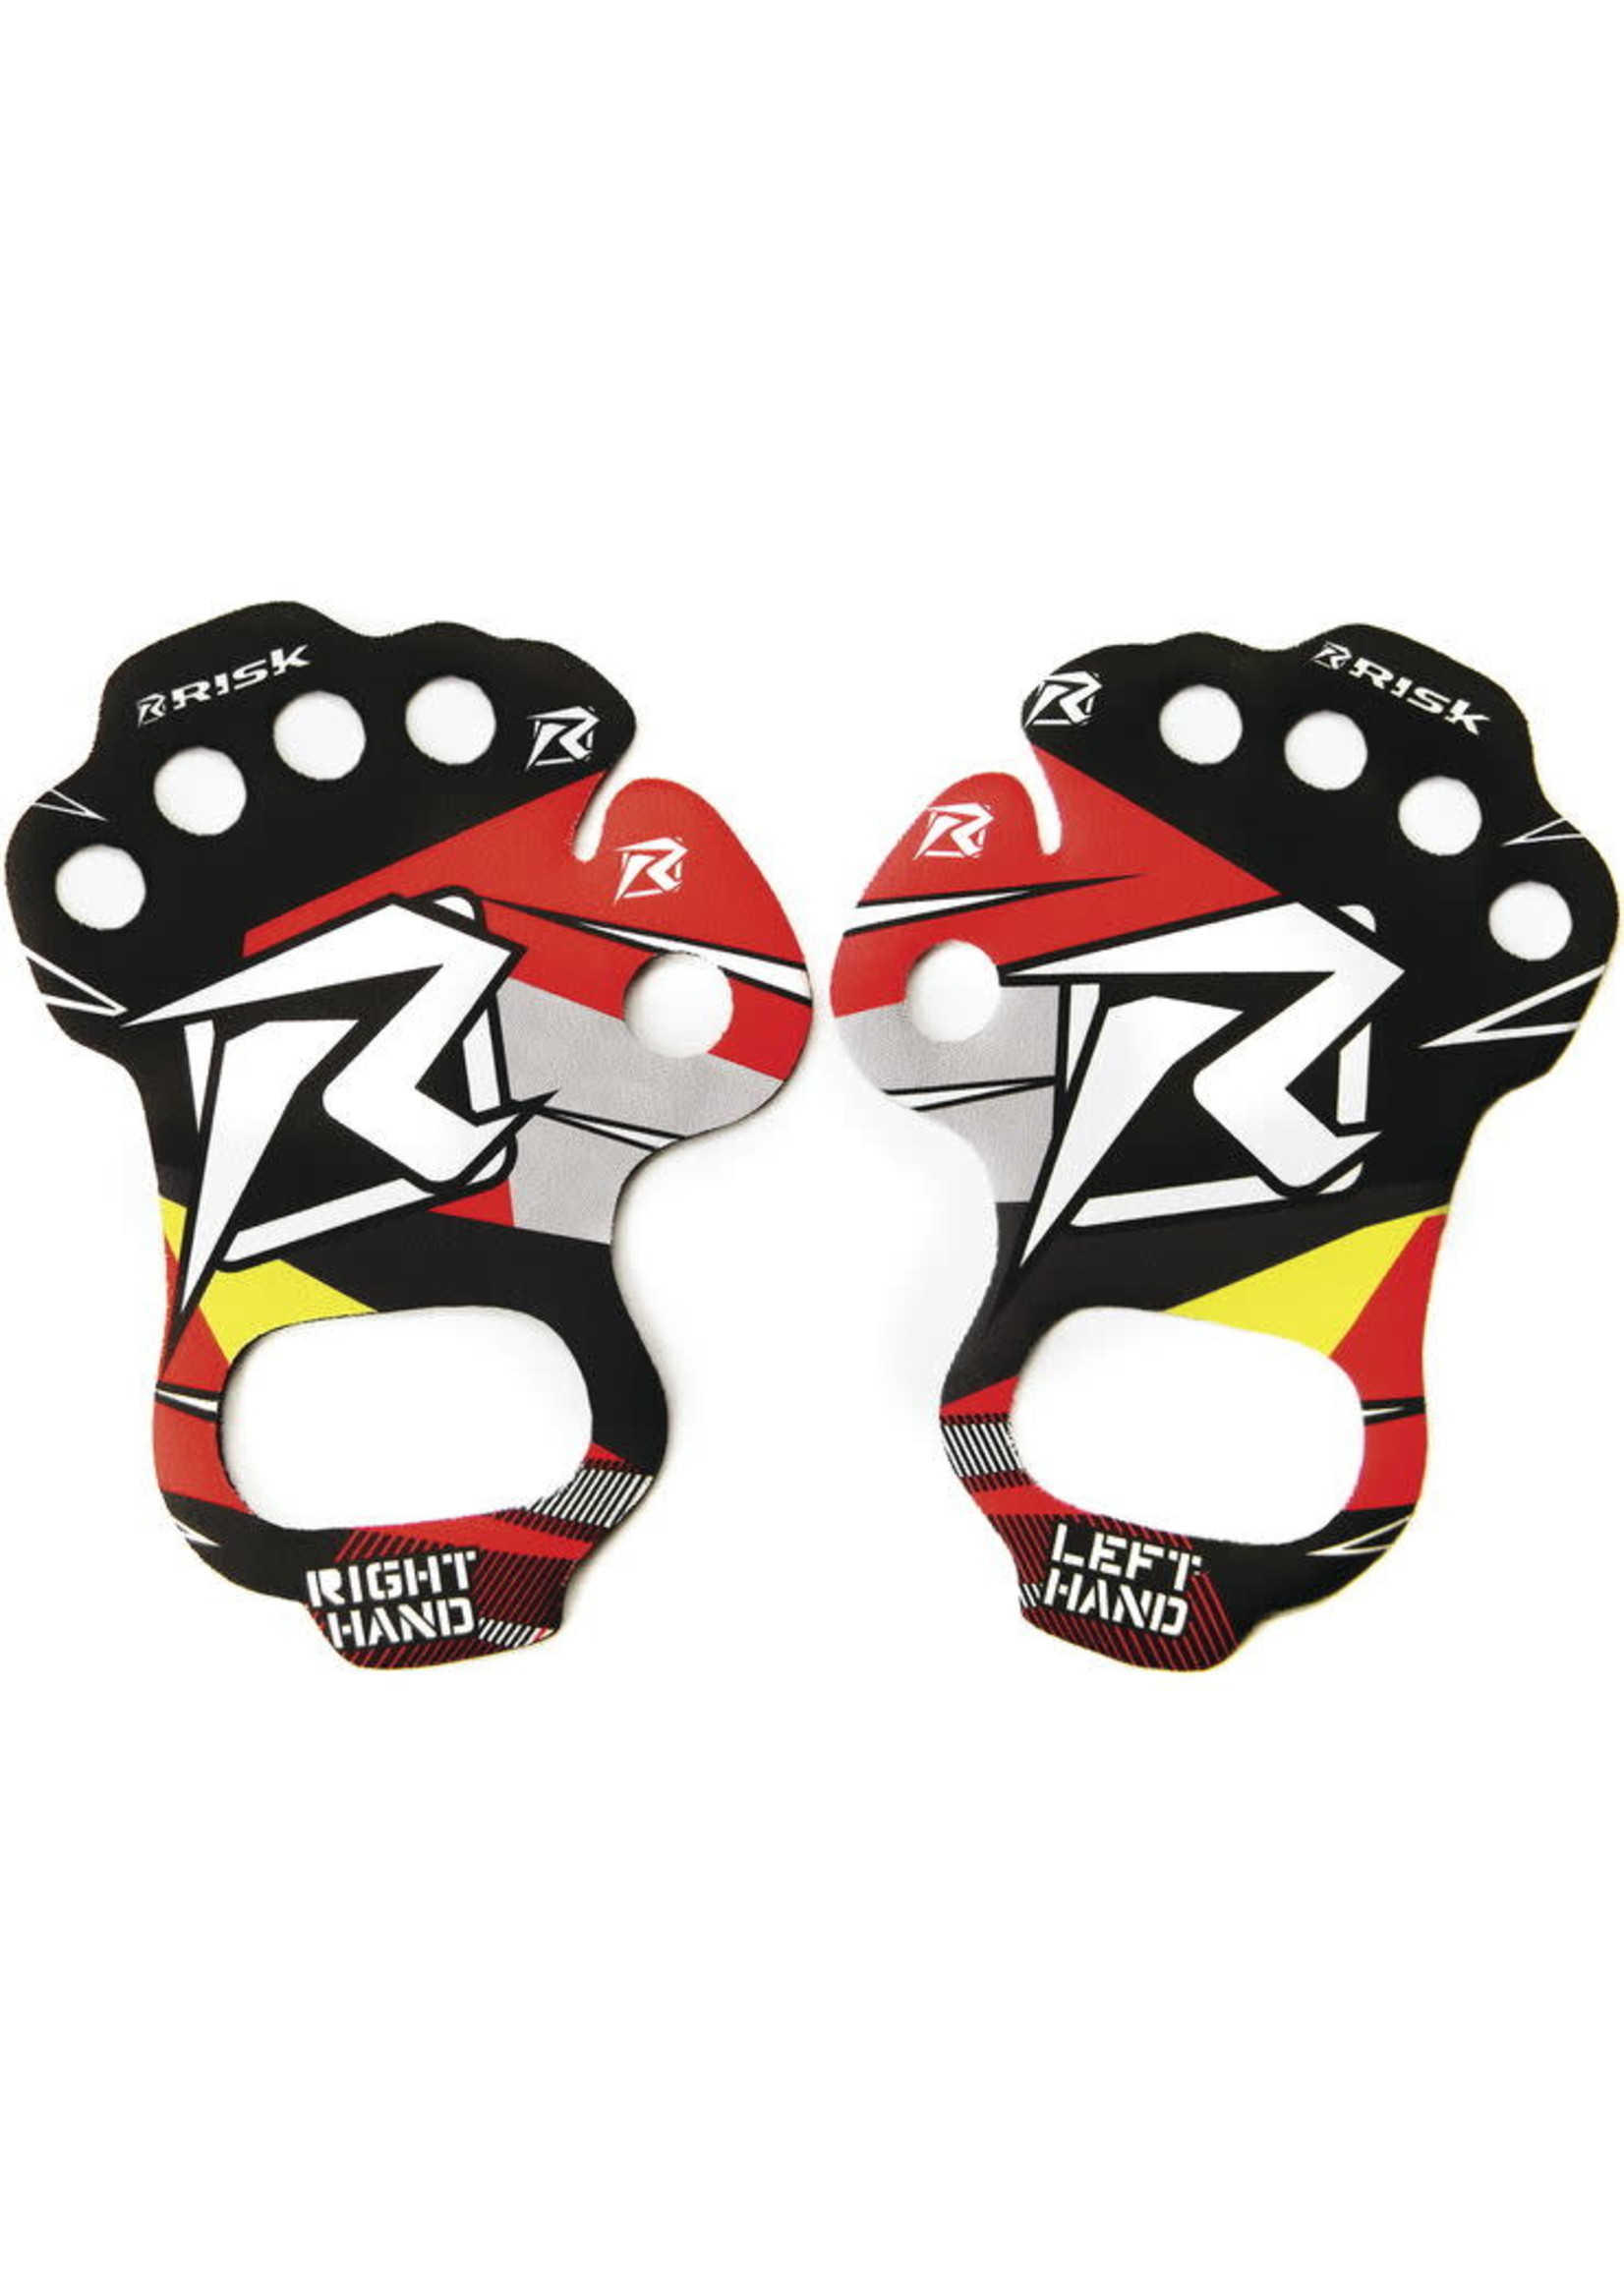 RISK Risk Racing Palm Protector XL